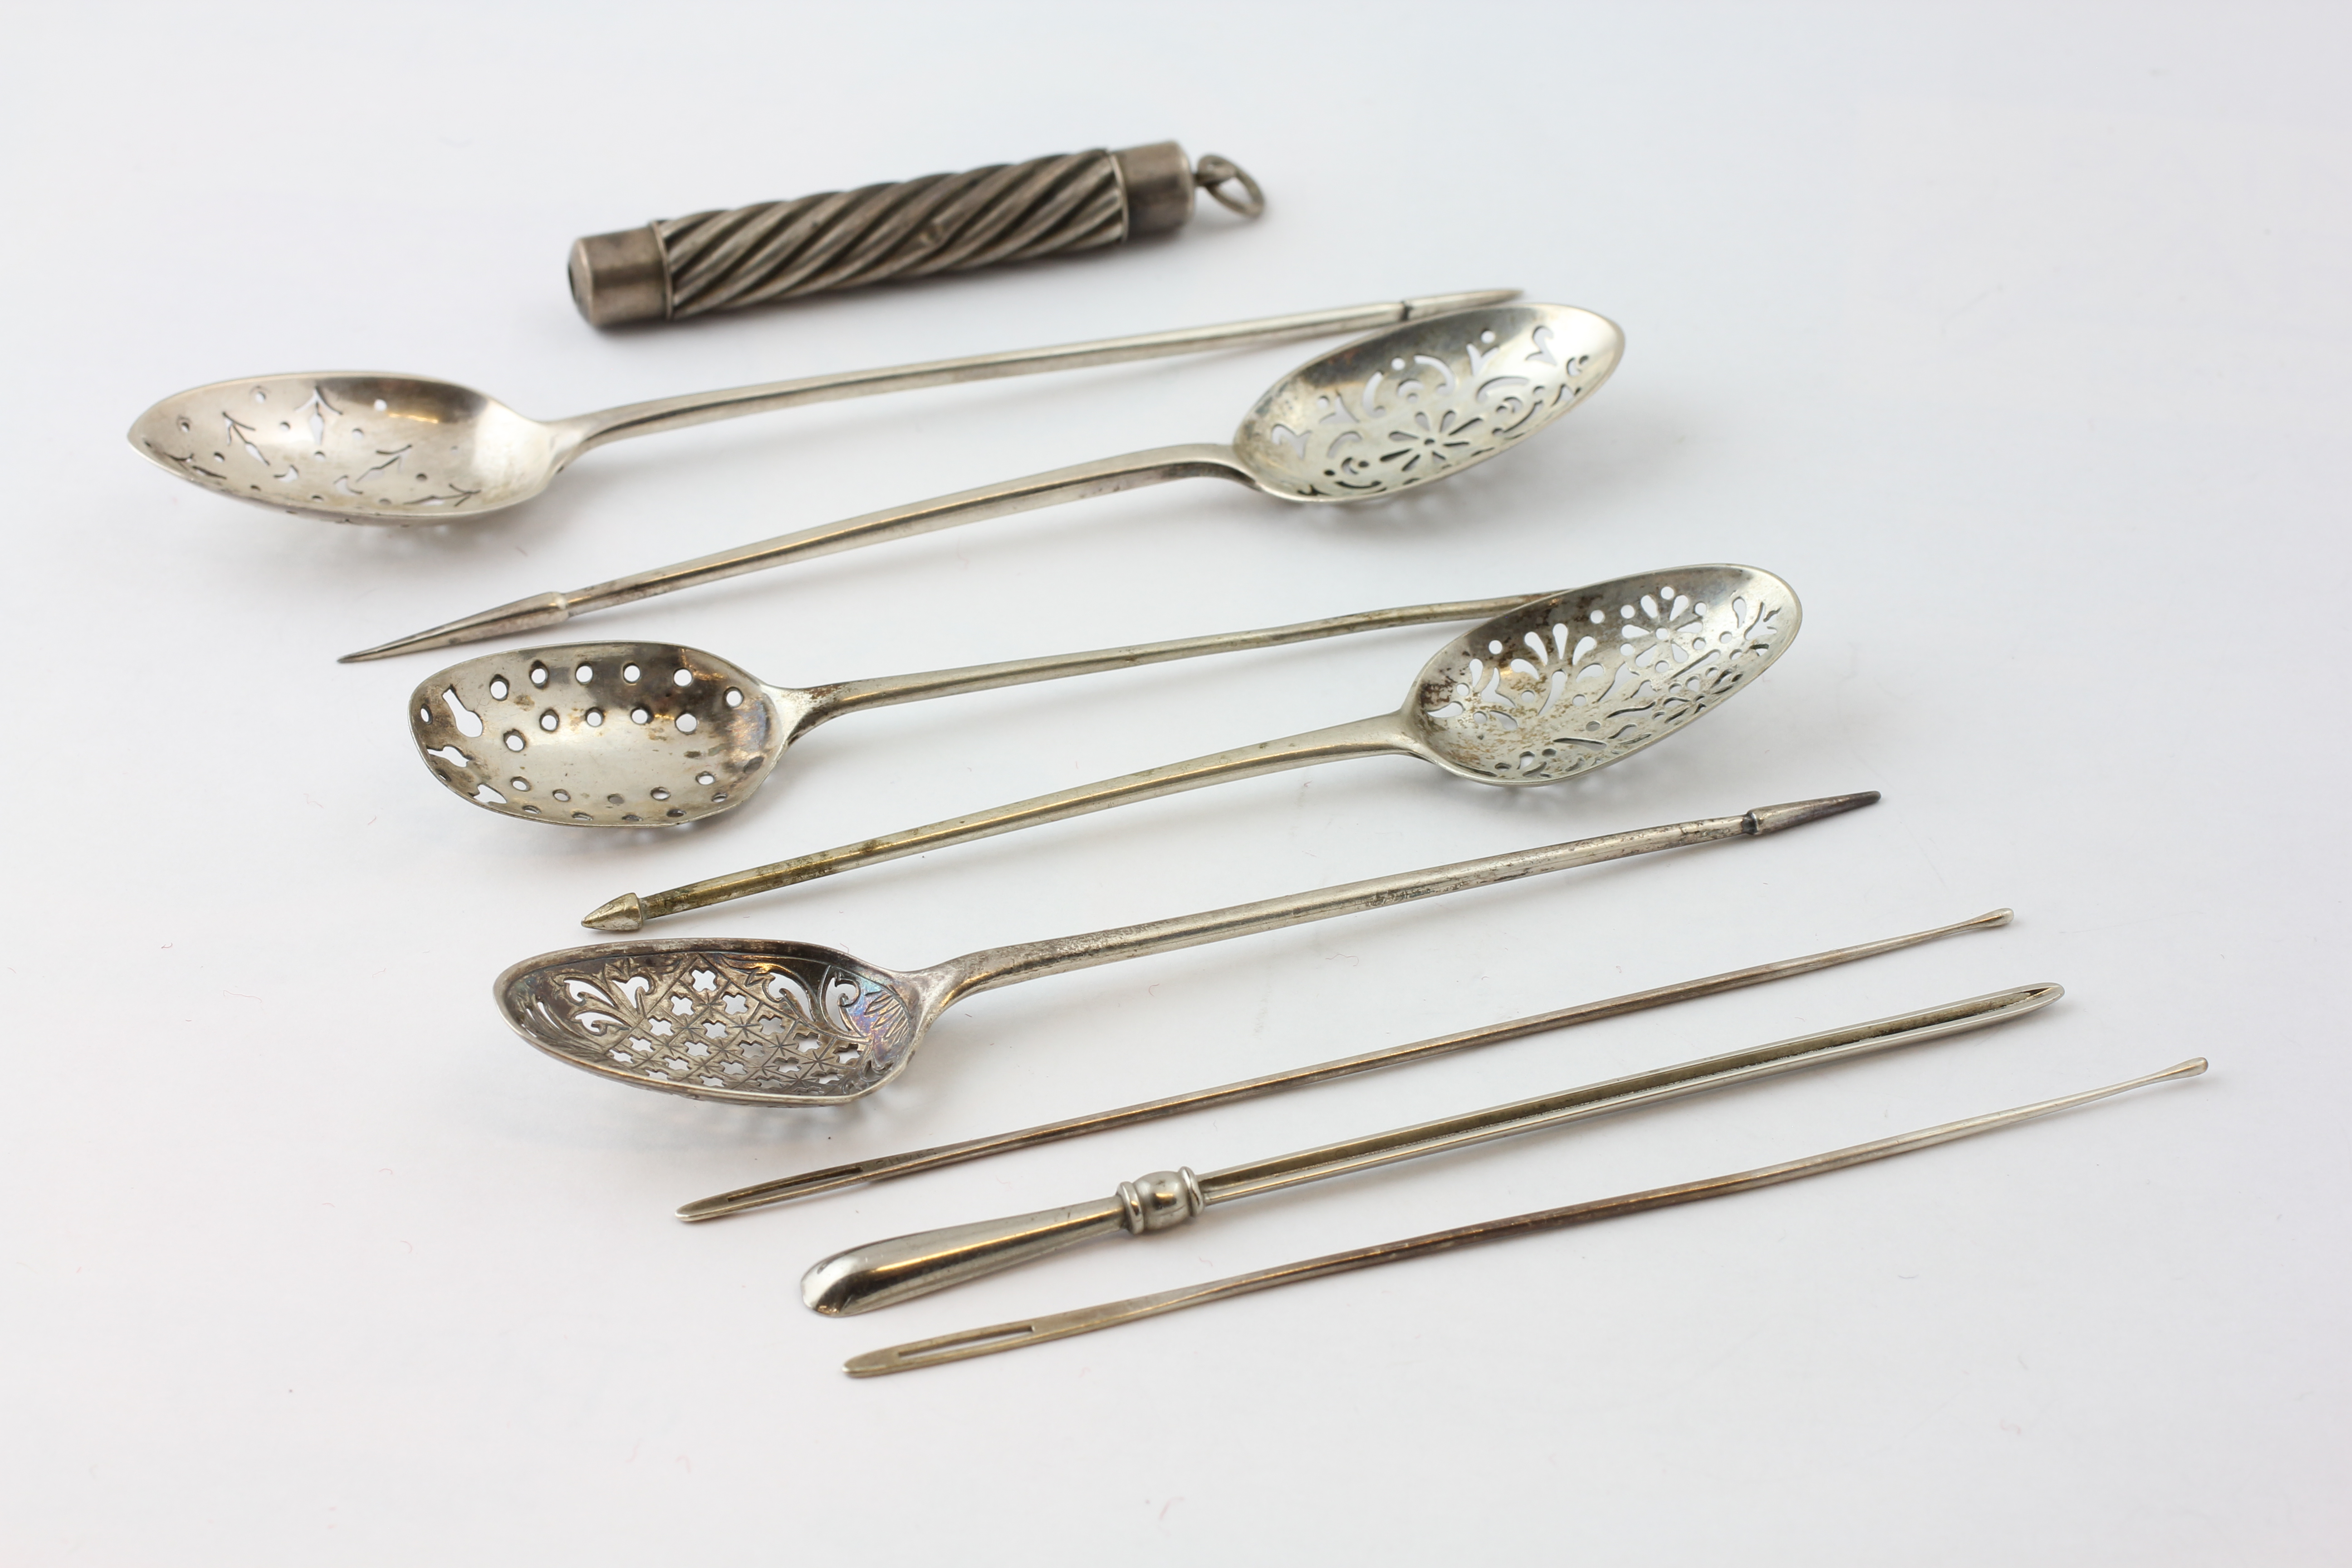 TWO SILVER MULBERRY/OLIVE SPOONS, LONDON 1799, THREE MULBERRY/OLIVE SPOONS, ONE EAR SCOOP,